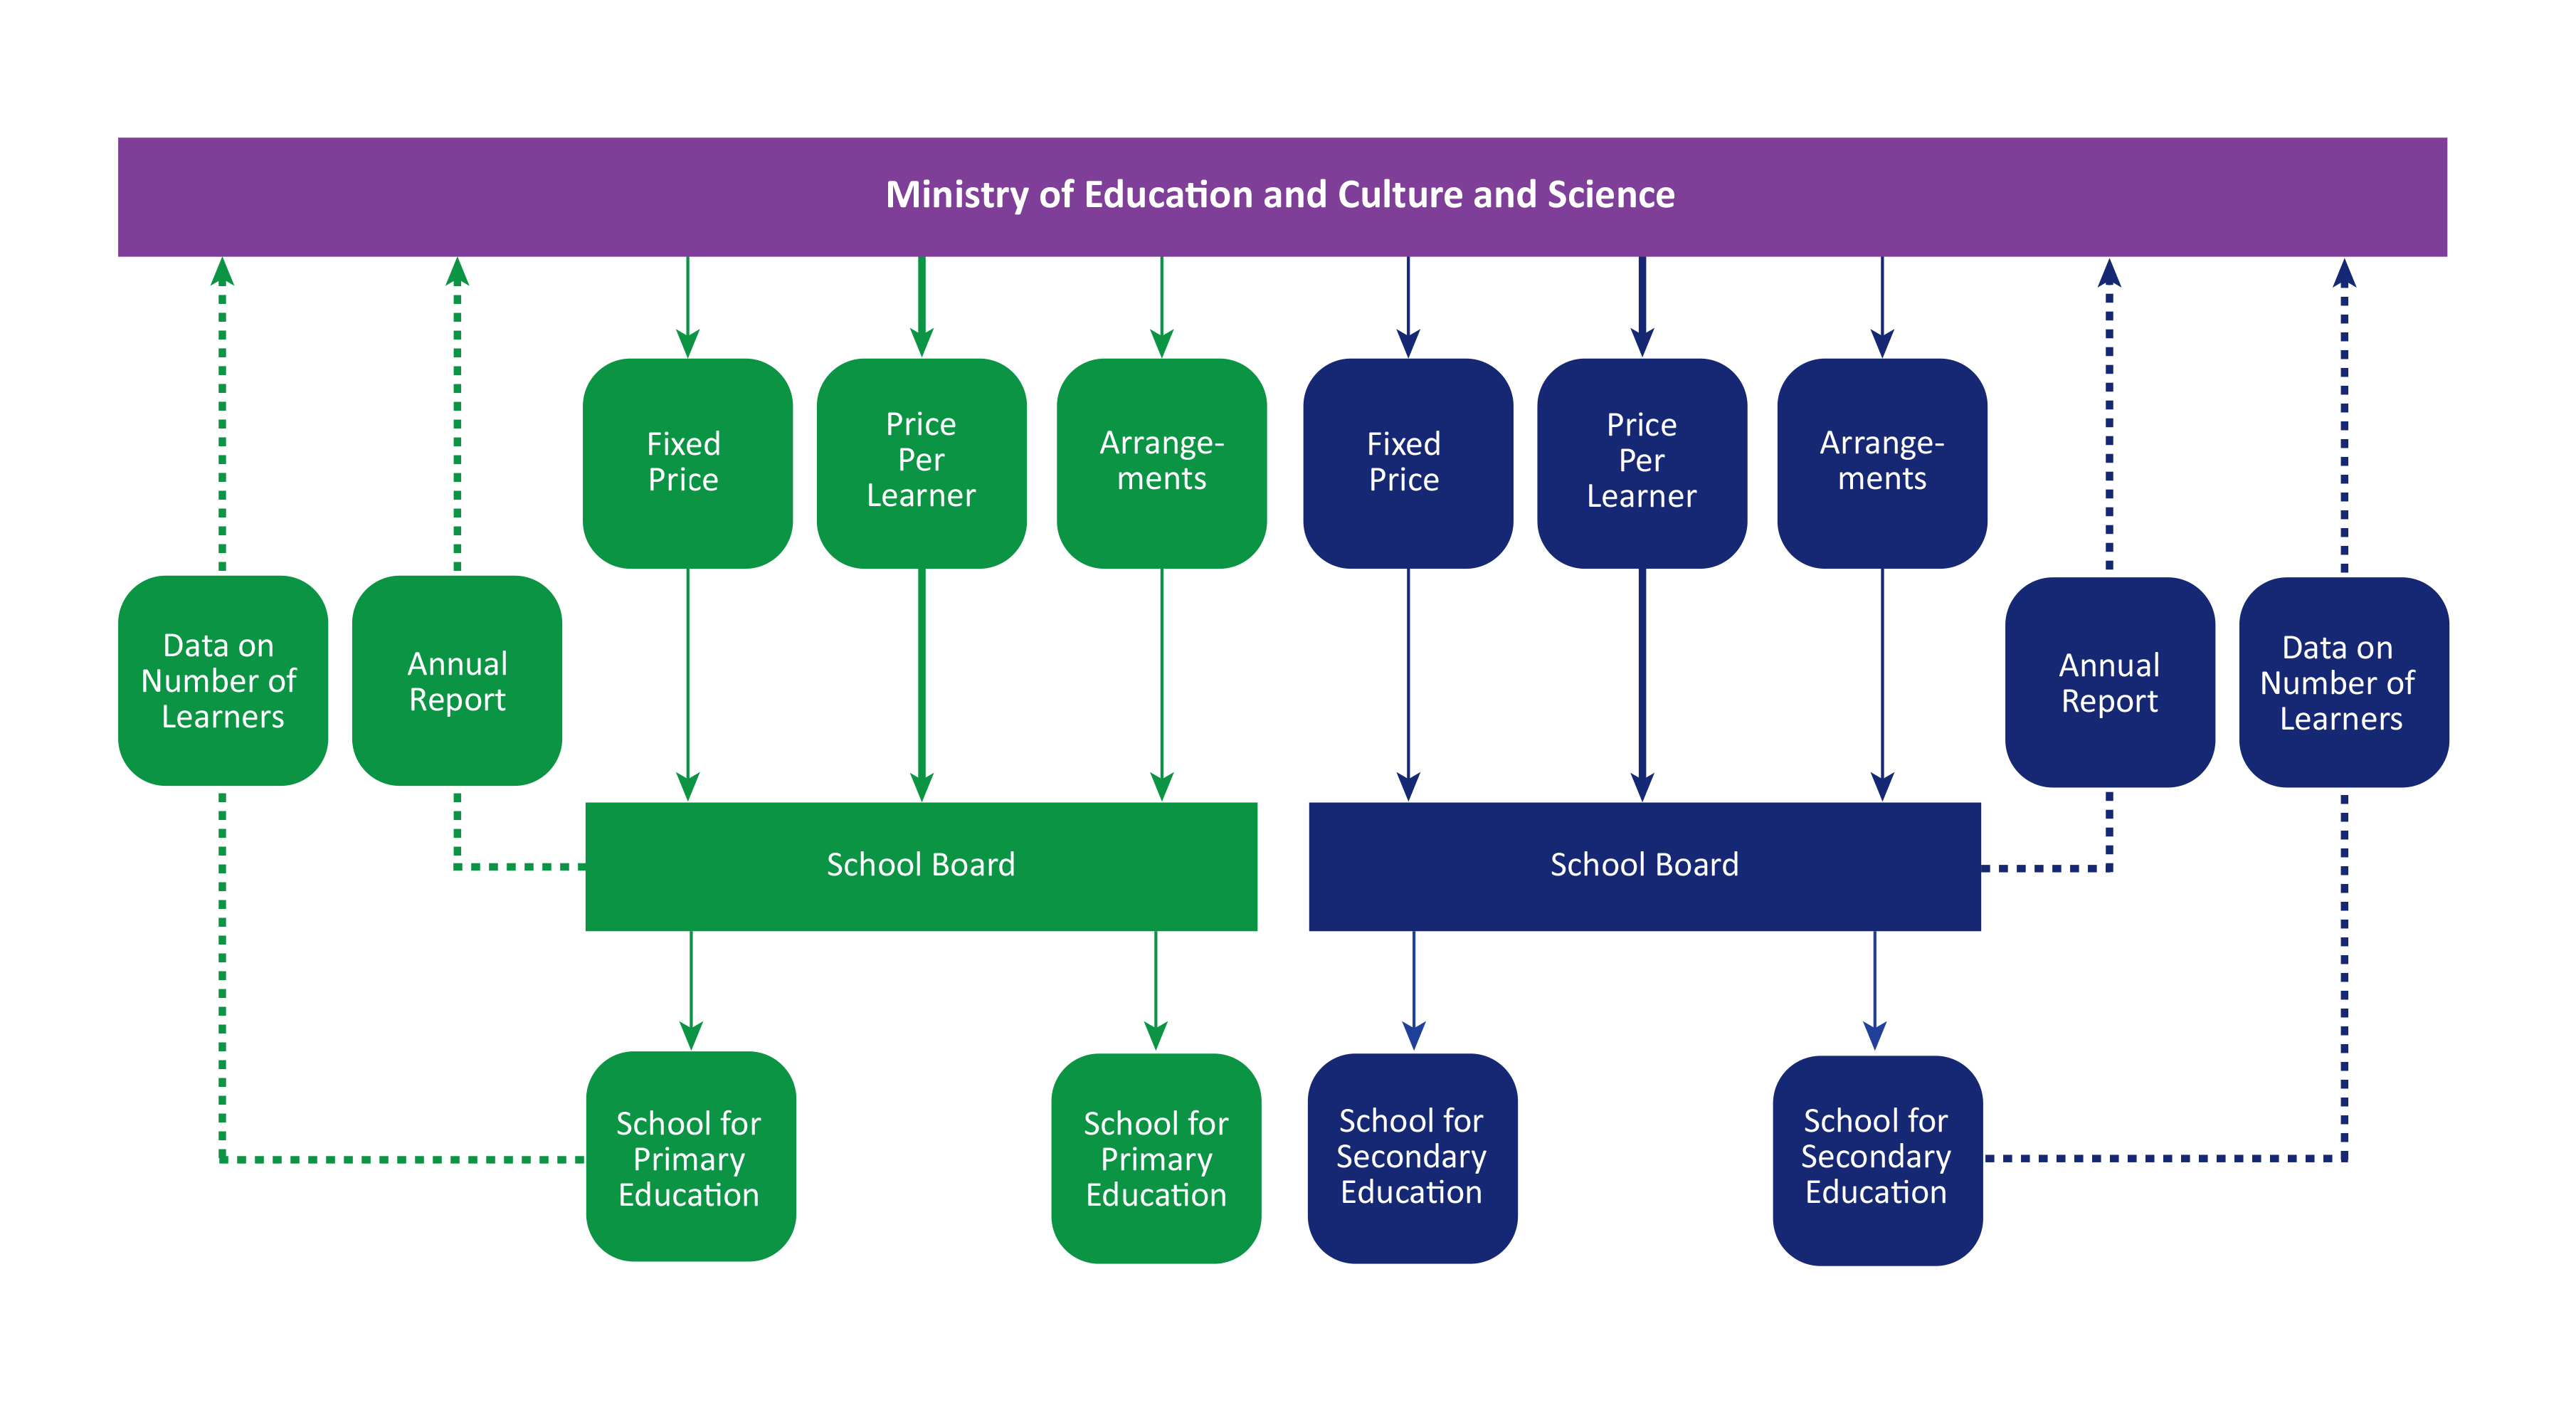 Flowchart depicting the components and allocation of general funding from the Ministry of Education to school boards and the elements returned by schools and school boards. The Ministry of Education, Culture and Science allocates Fixed price, Price per learner and Arrangements to the school board of primary schools. The school board submits an annual report to the Ministry, while the school submits data on the number of learners. The same system applies at secondary level.